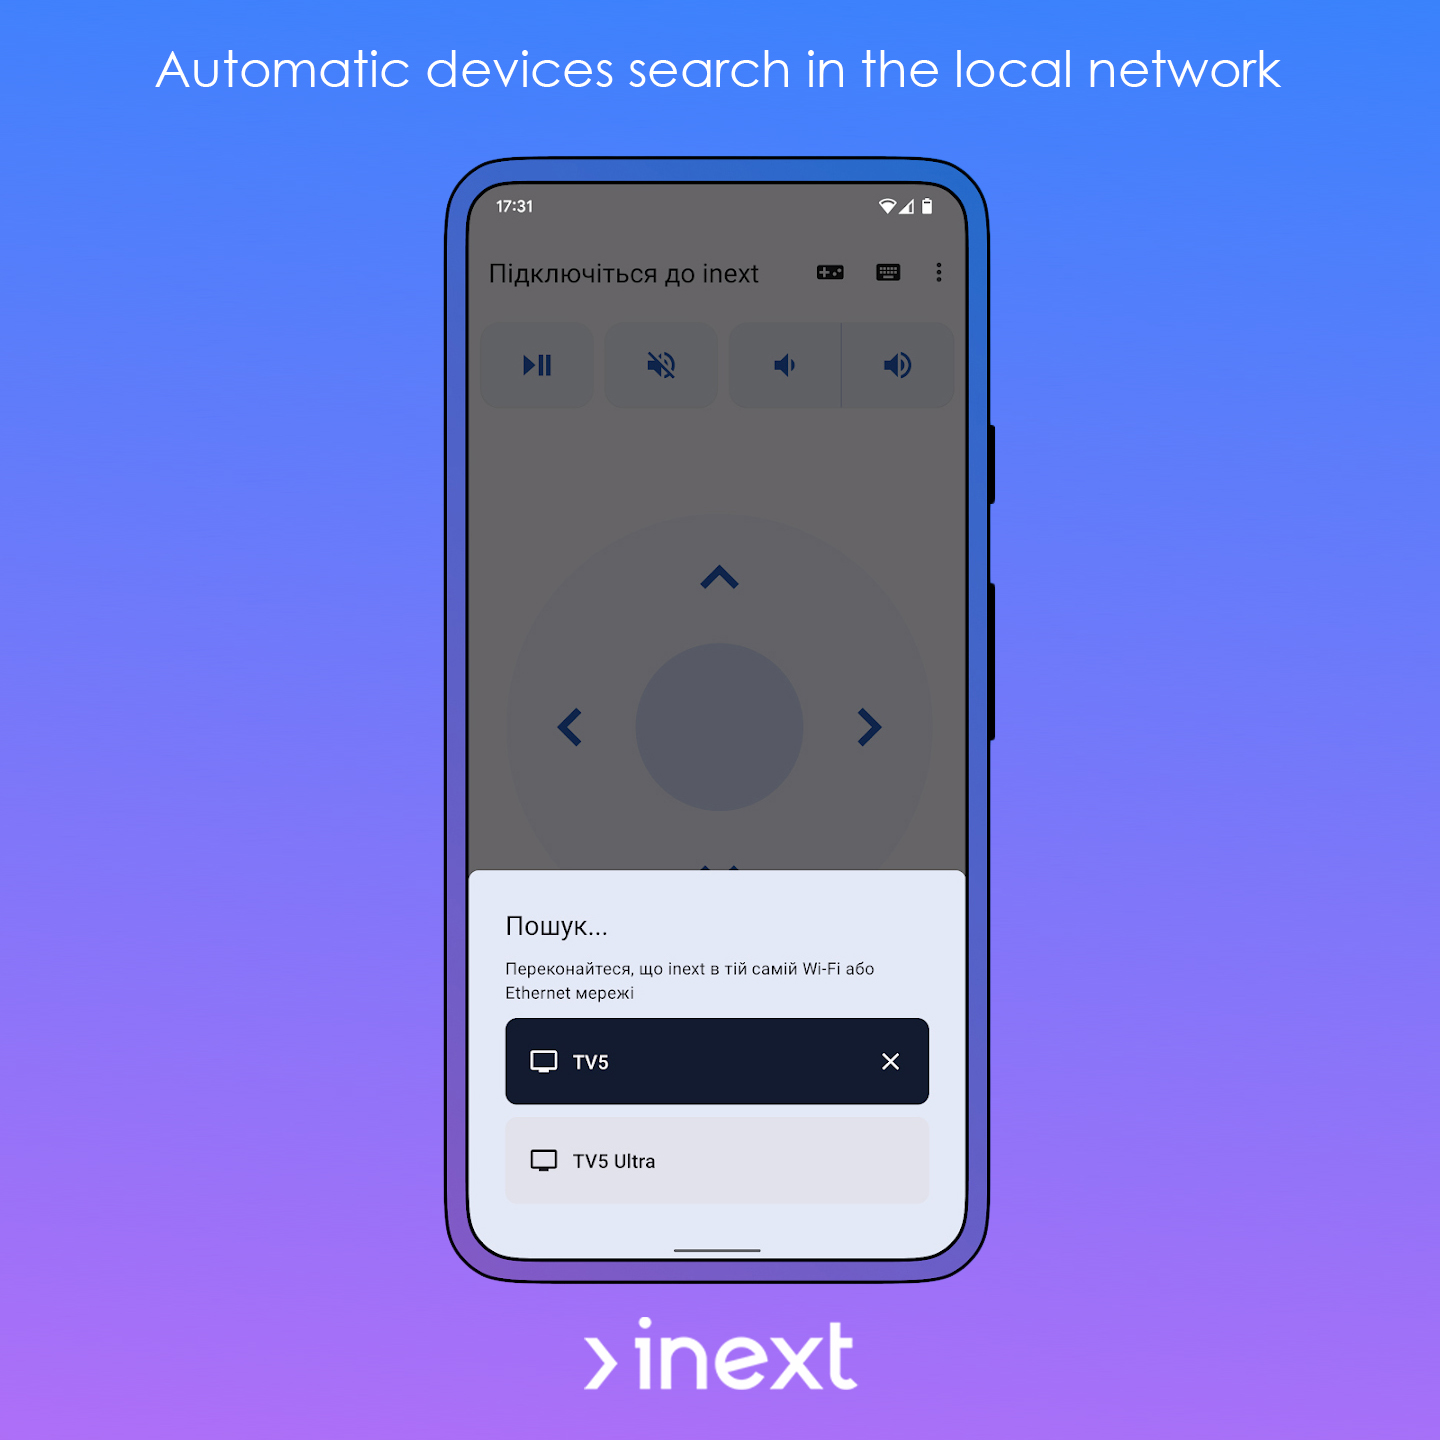 inext remote control app - drug and drop